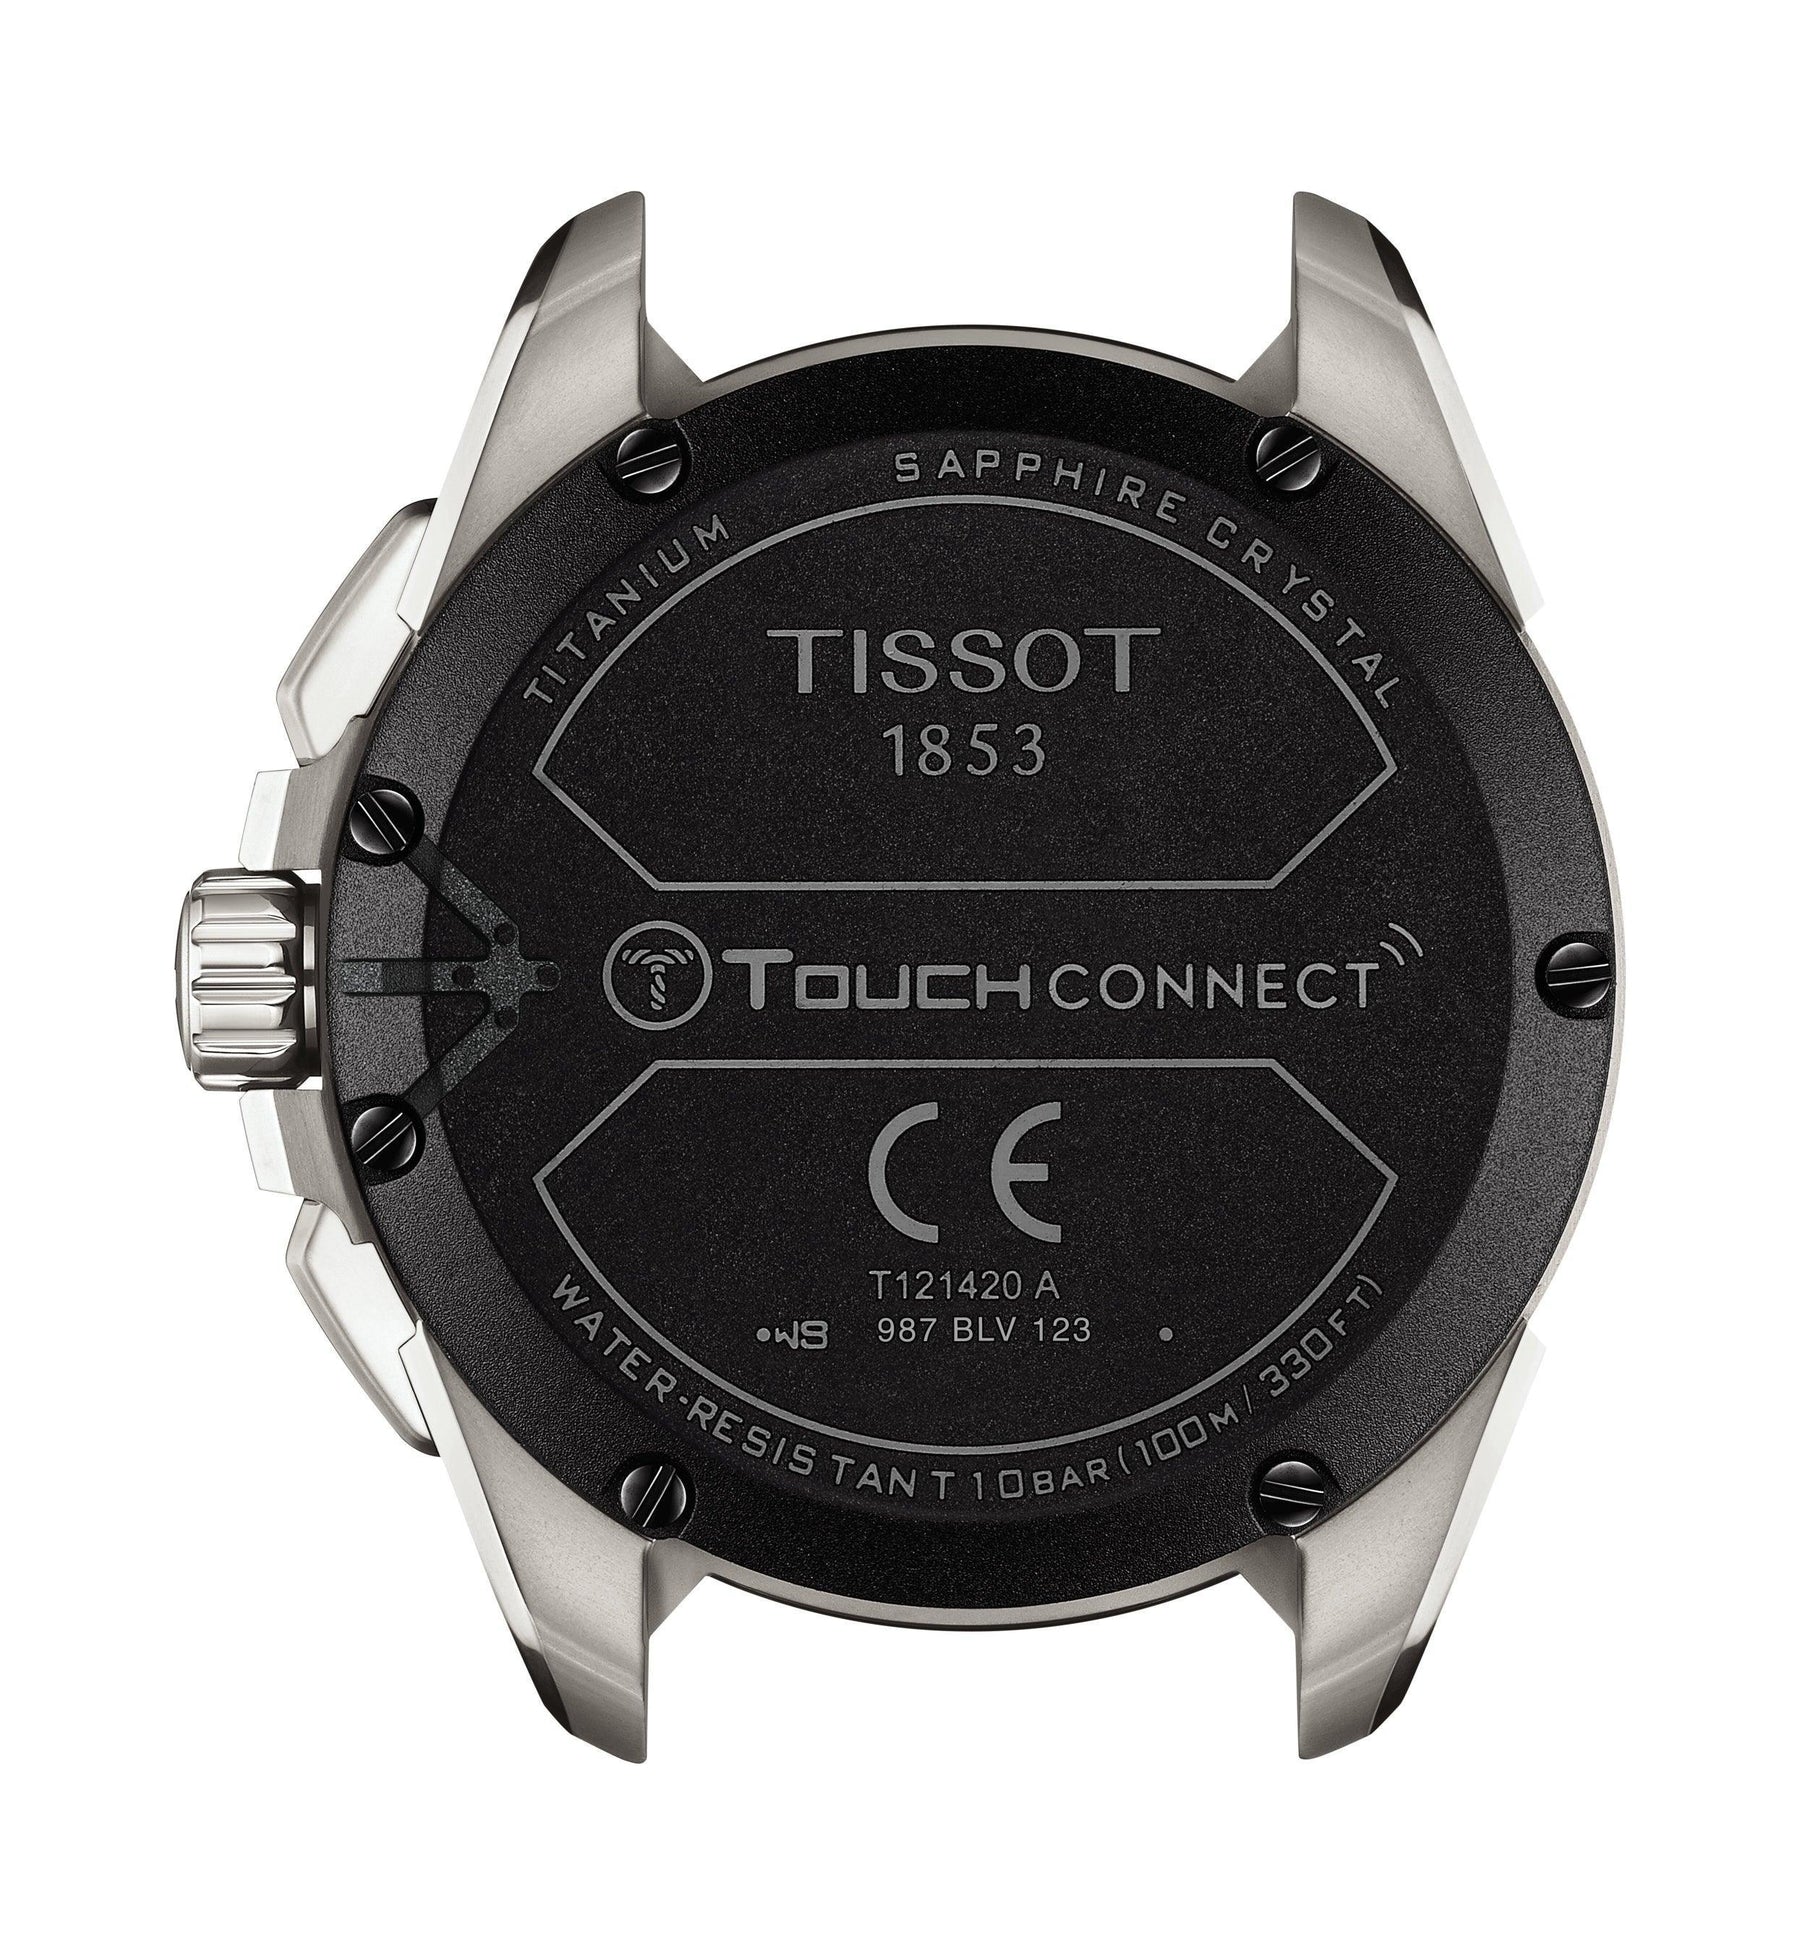 Tissot T-Touch T-Sport Men's 47.5mm Solar LCD Watch T121.420.47.051.00 - Wallace Bishop